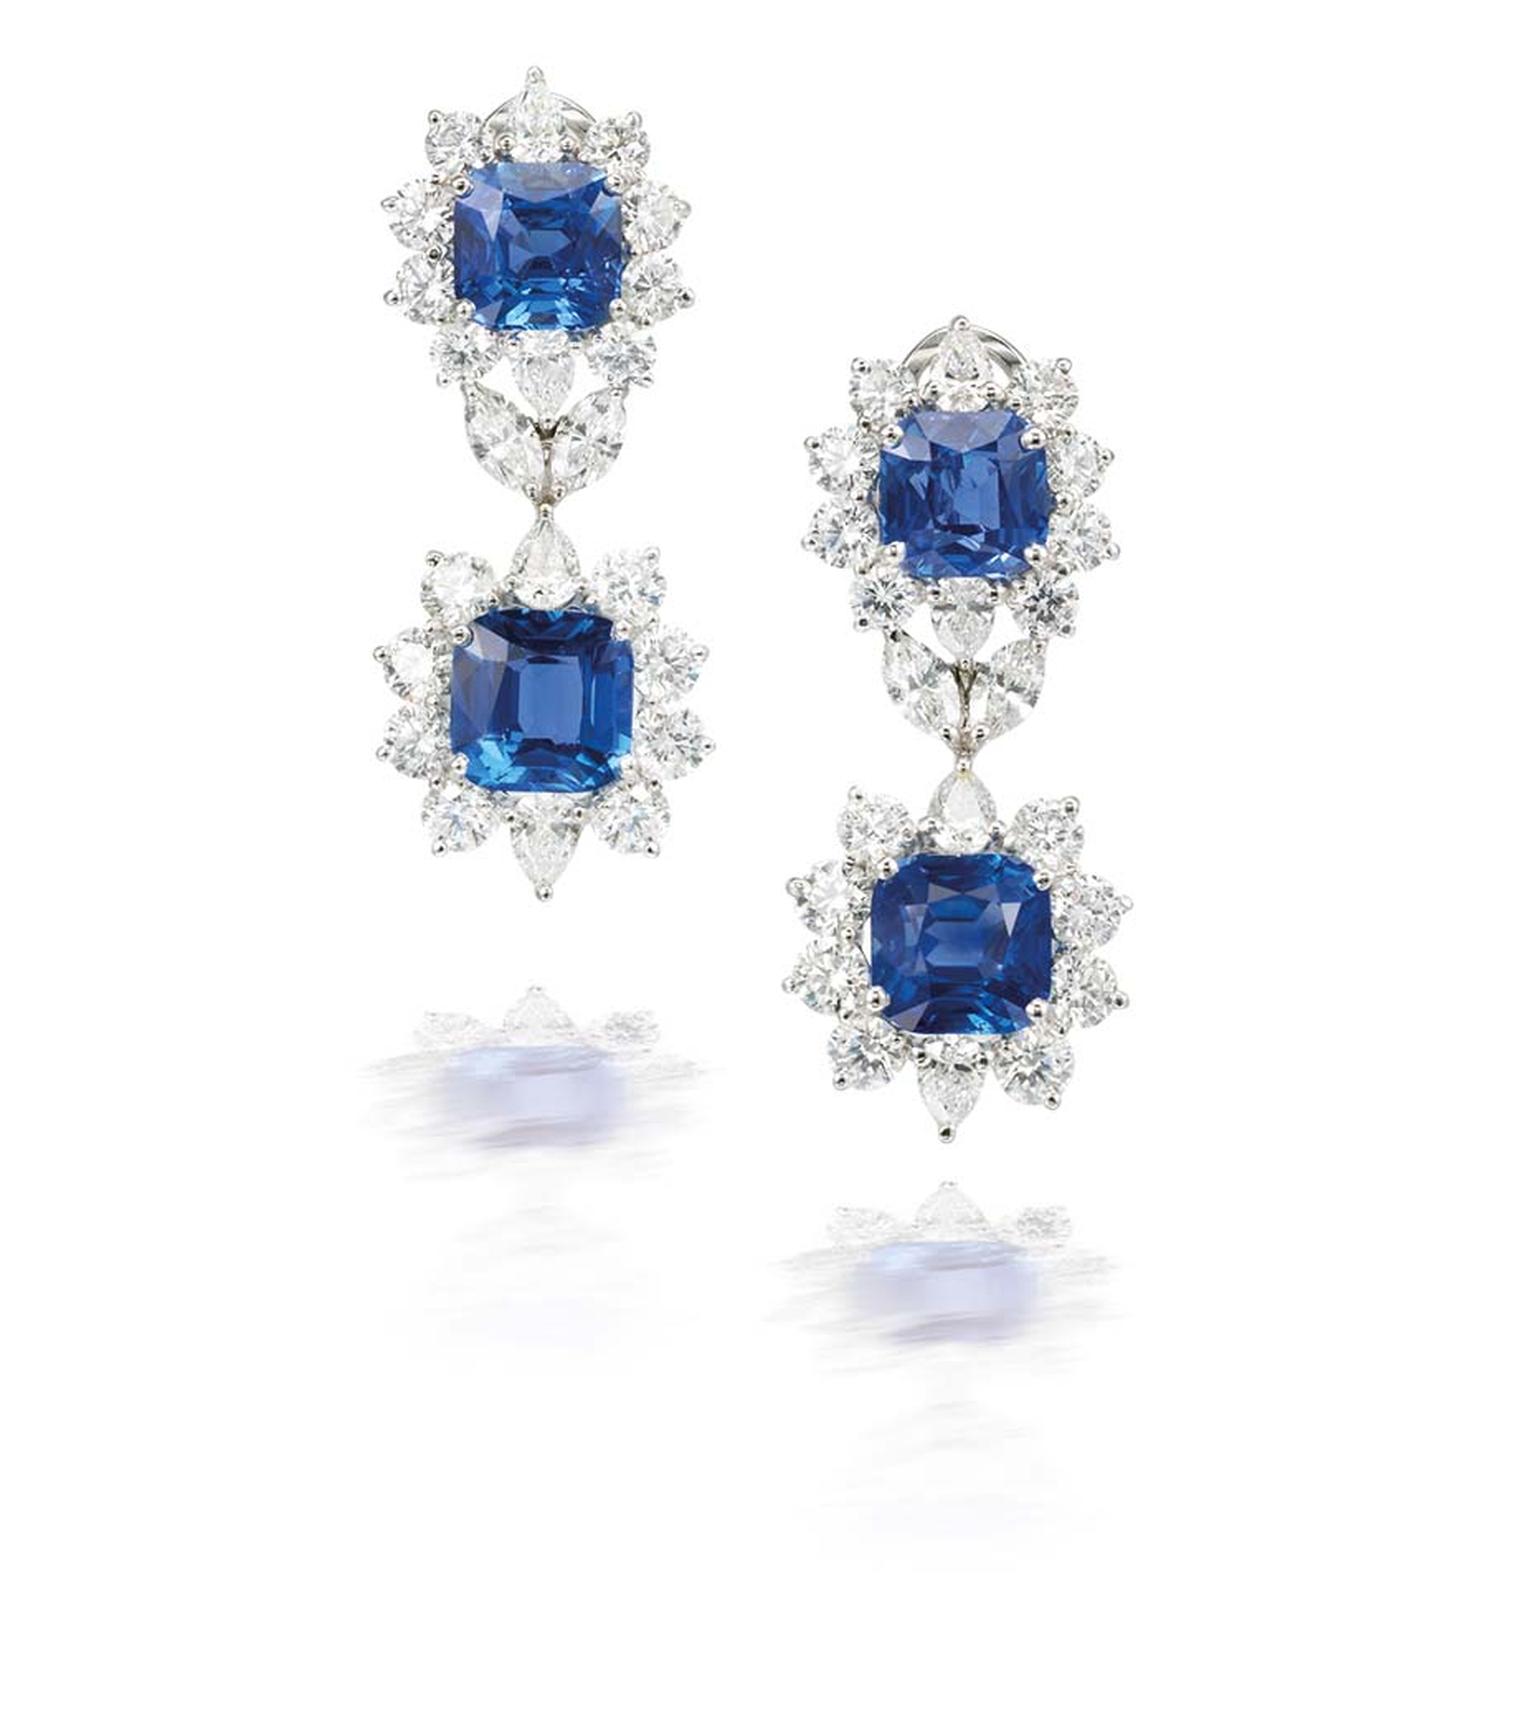 Sapphire and diamond earrings - part of the Amelia suite by Marina B - featuring Ceylon sapphires (estimate for the suite: £305,000-390,000).